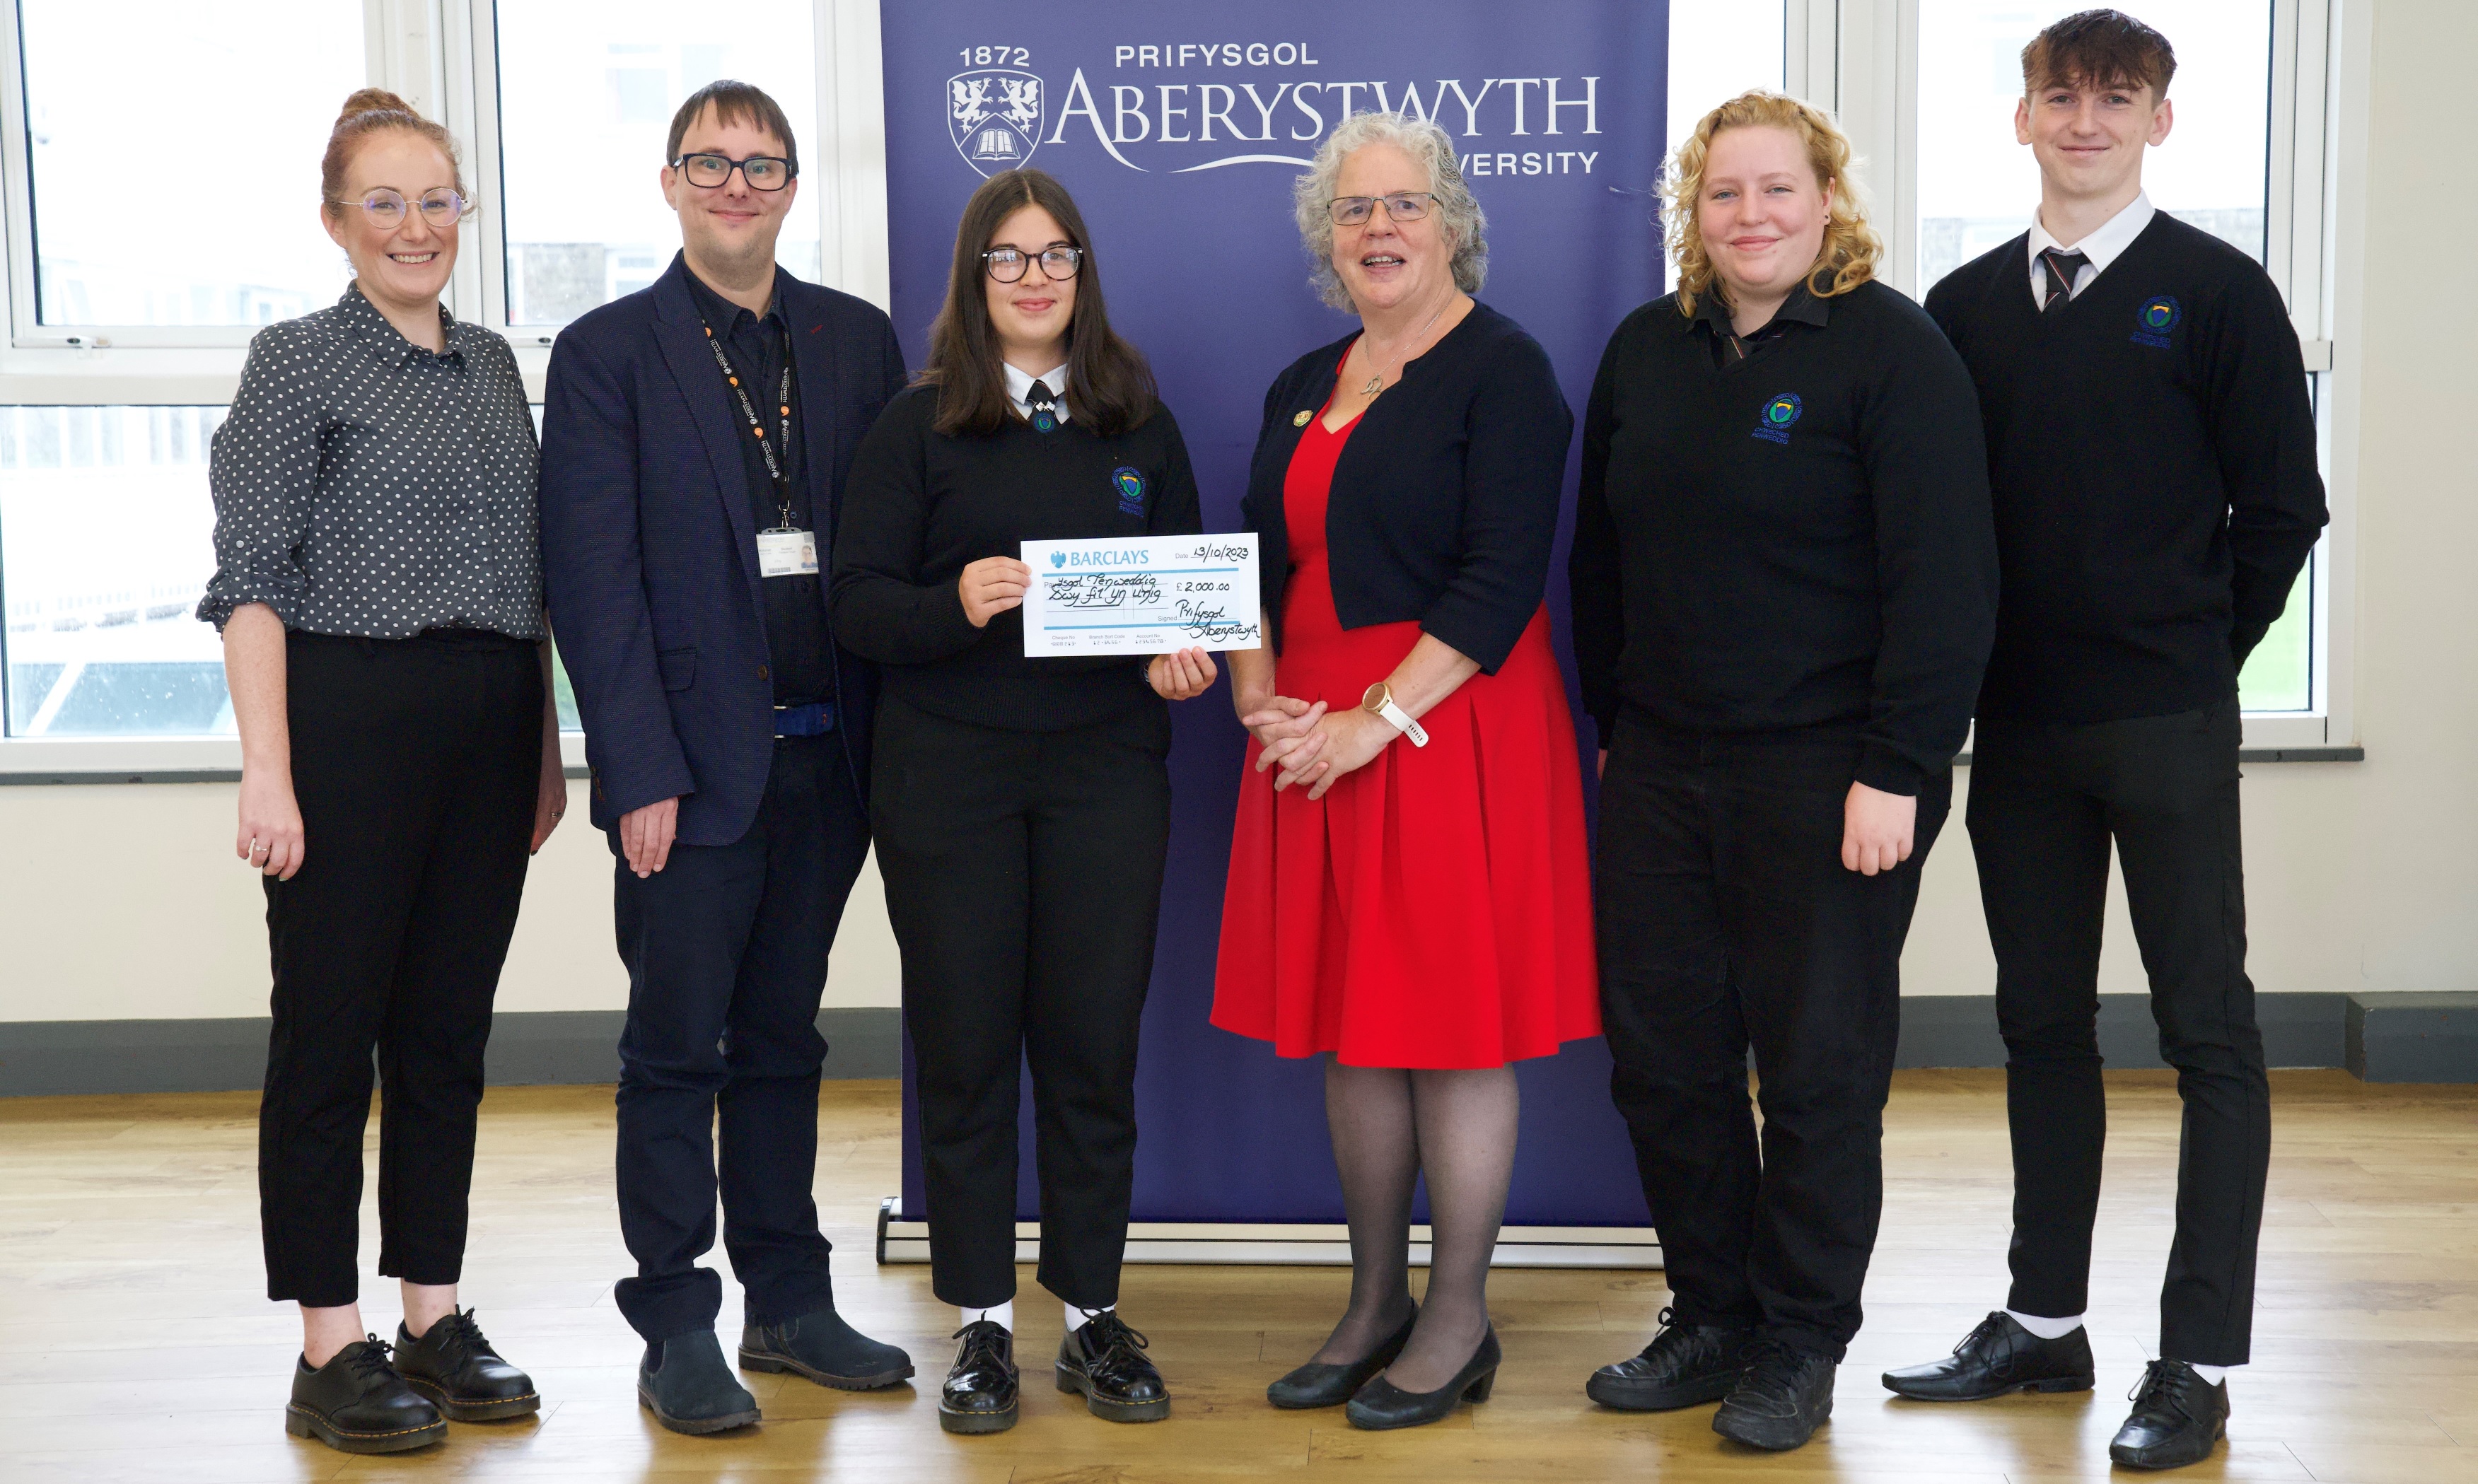 Members of the winning Penweddig team Maria Jones, Elain Tanat Morgan (second from the right) and Noa Rowlands presented with a cheque for £2000 by Professor Elizabeth Treasure, Vice-Chancellor of Aberystwyth University in the company of Jane Richards, Head of Business at Ysgol Penweddig (far left) and Mr Jonathan Fry from Aberystwyth Business School.